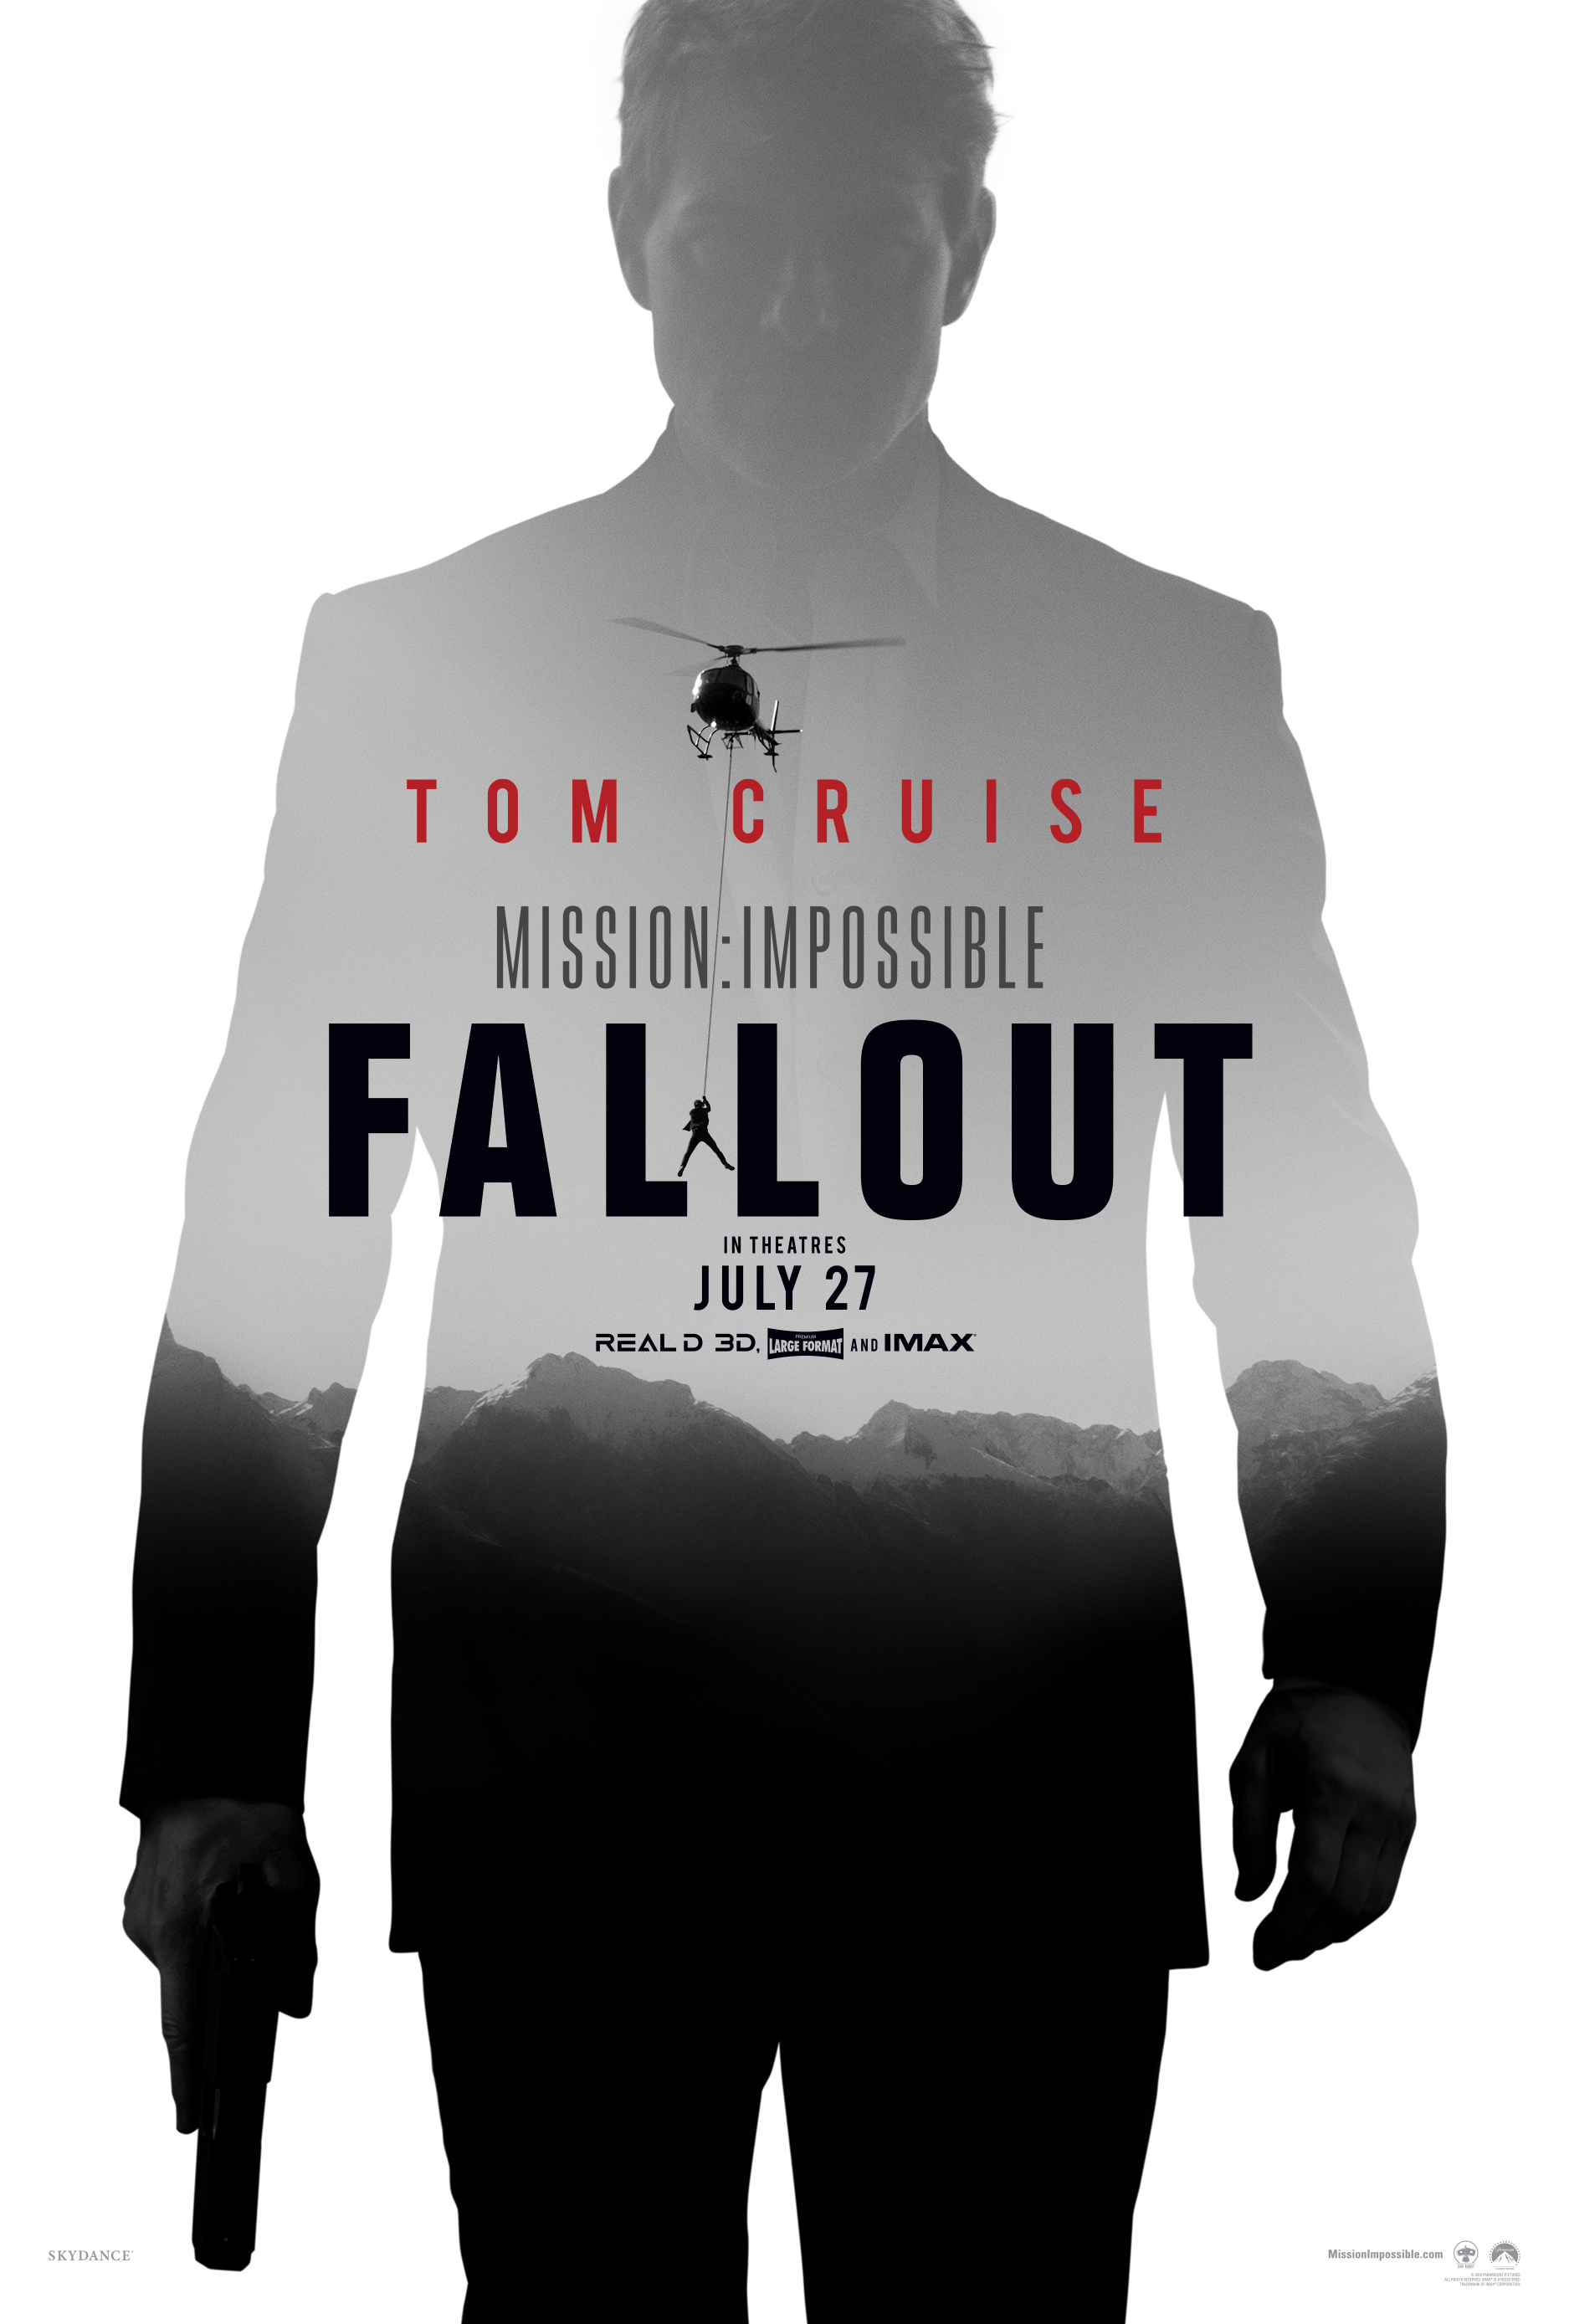 Mission impossible fallout movie poster